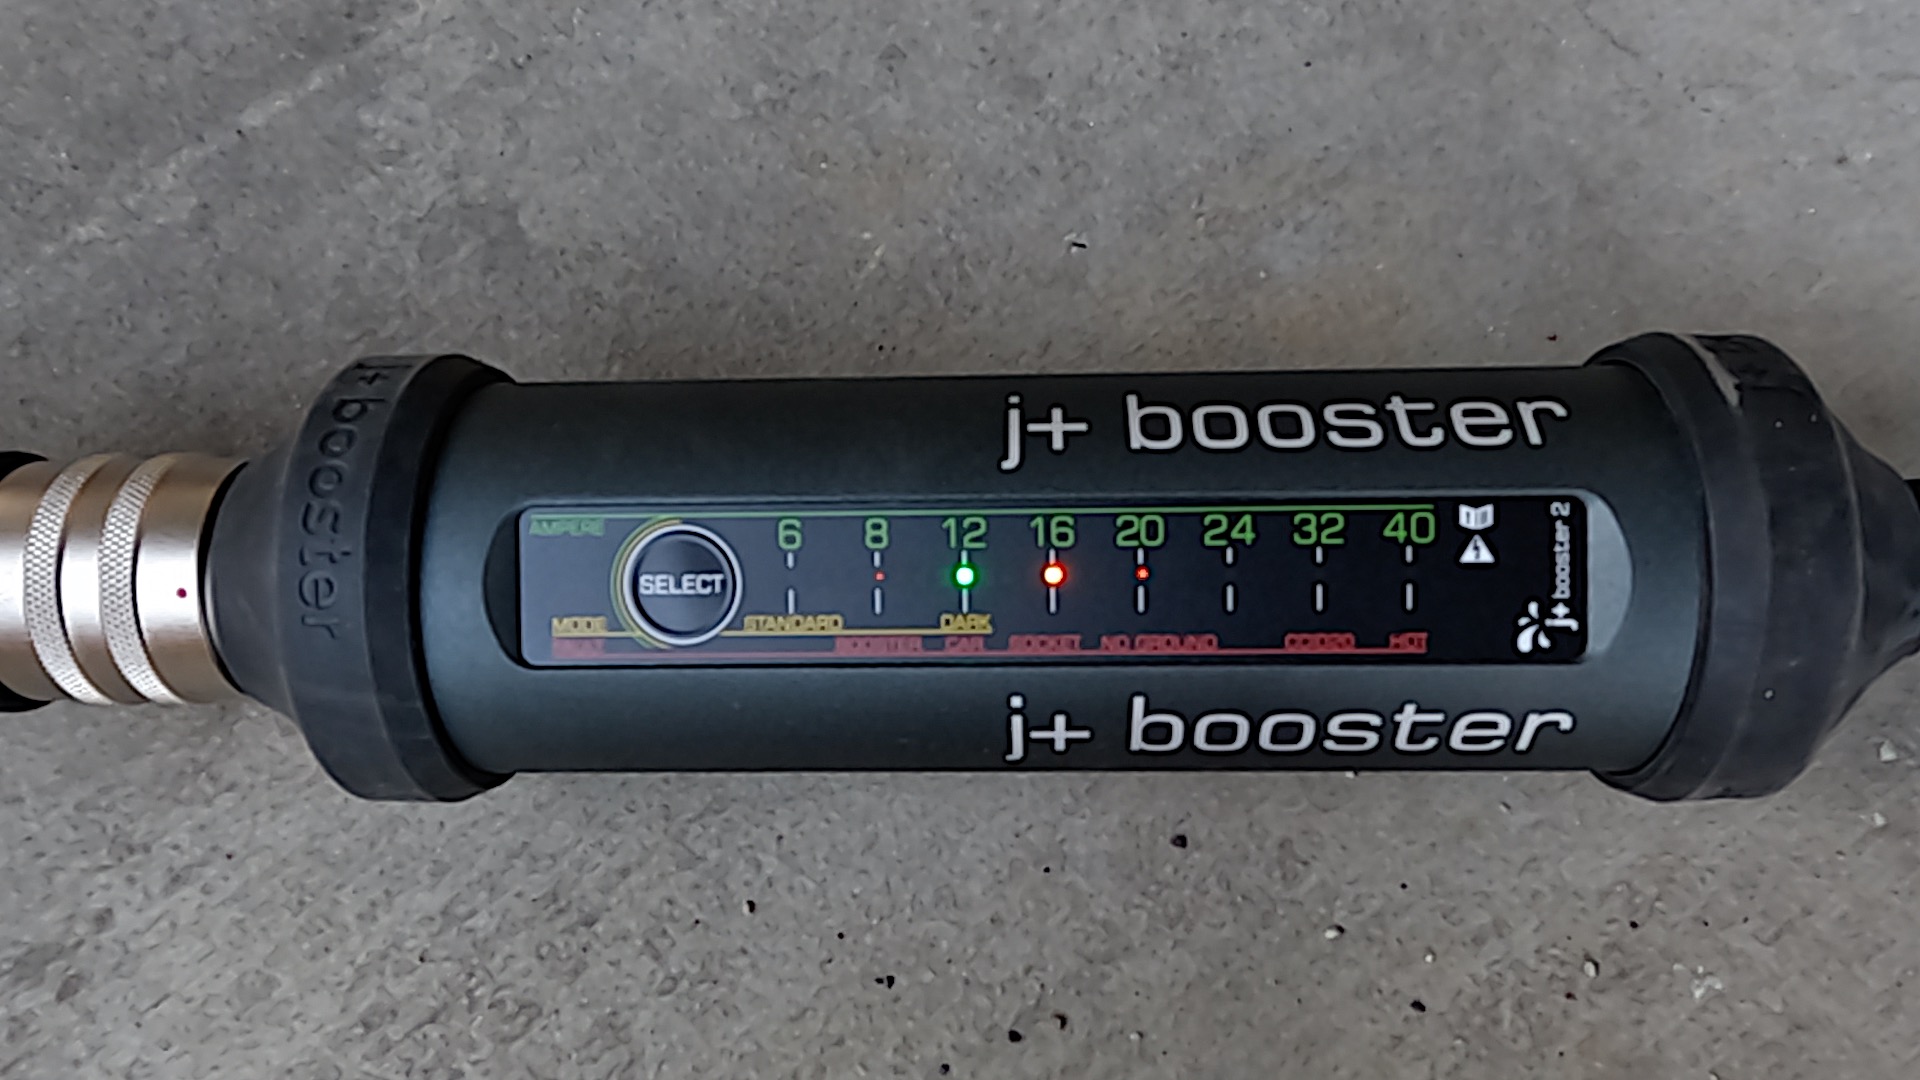 J+ BOOSTER 2 Home/Travel EV Charger Review [Video] WNEWS247